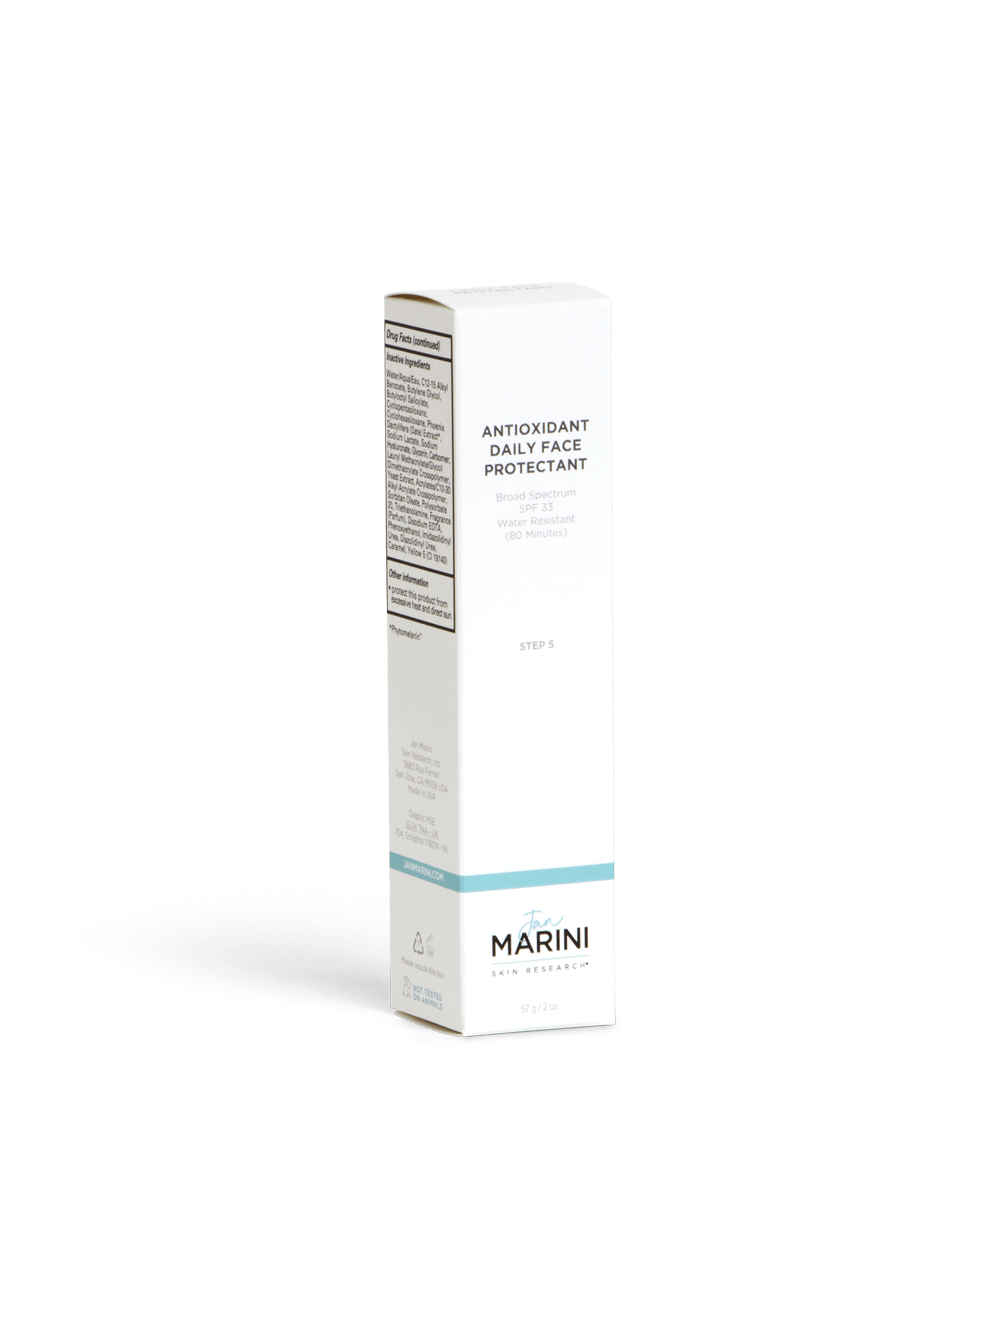 Antioxidant Daily Face Protectant - Pearl Skin Studio